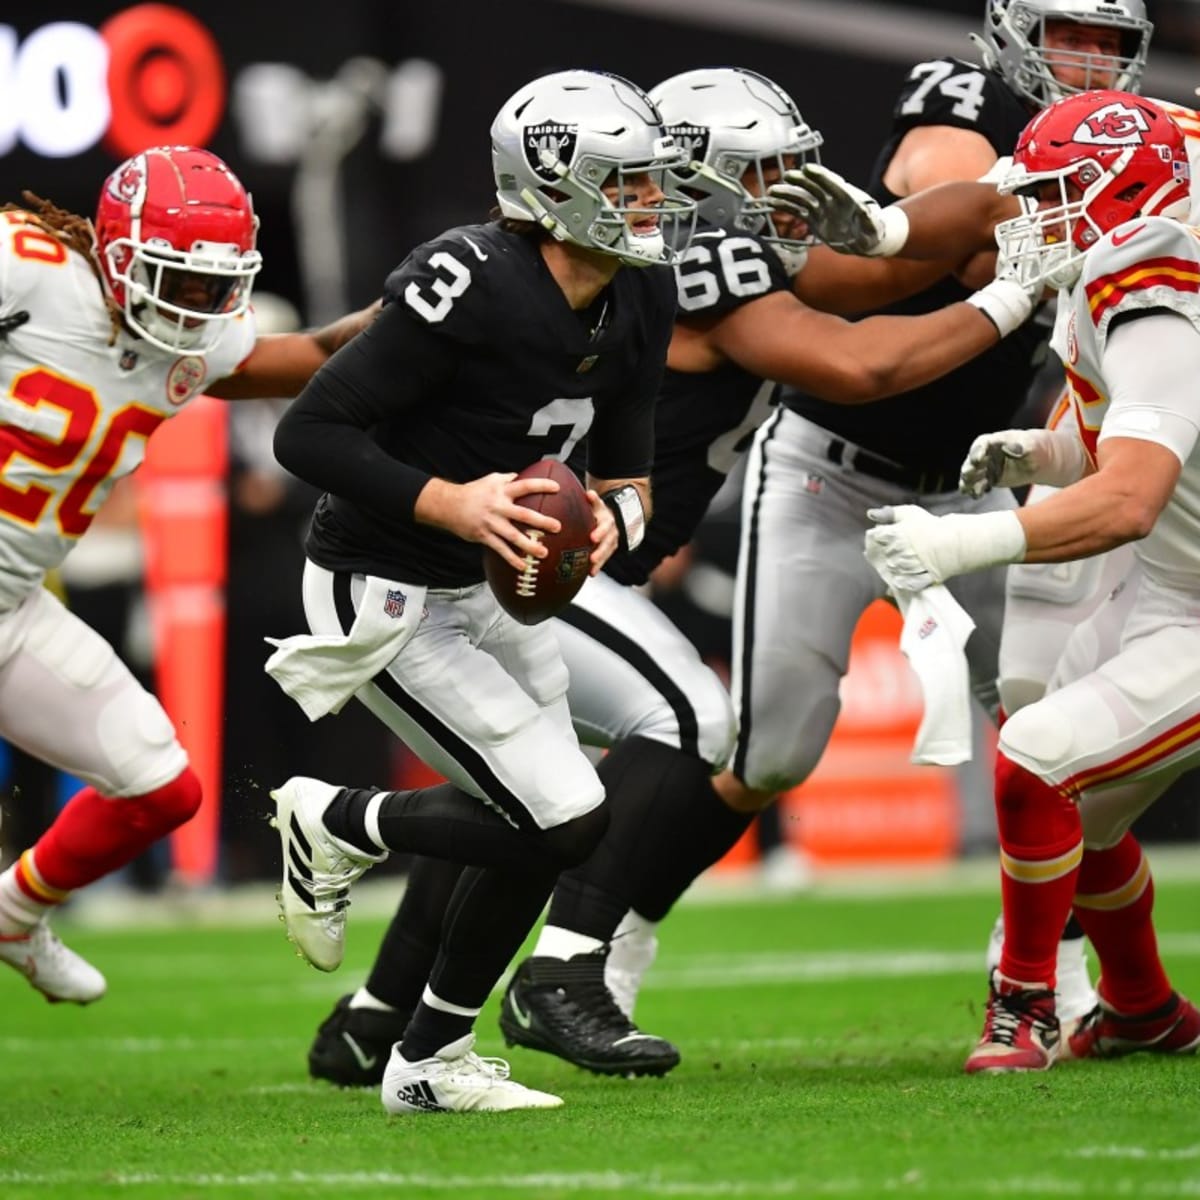 Raiders fall to AFC West rival Kansas City Chiefs on 'MNF